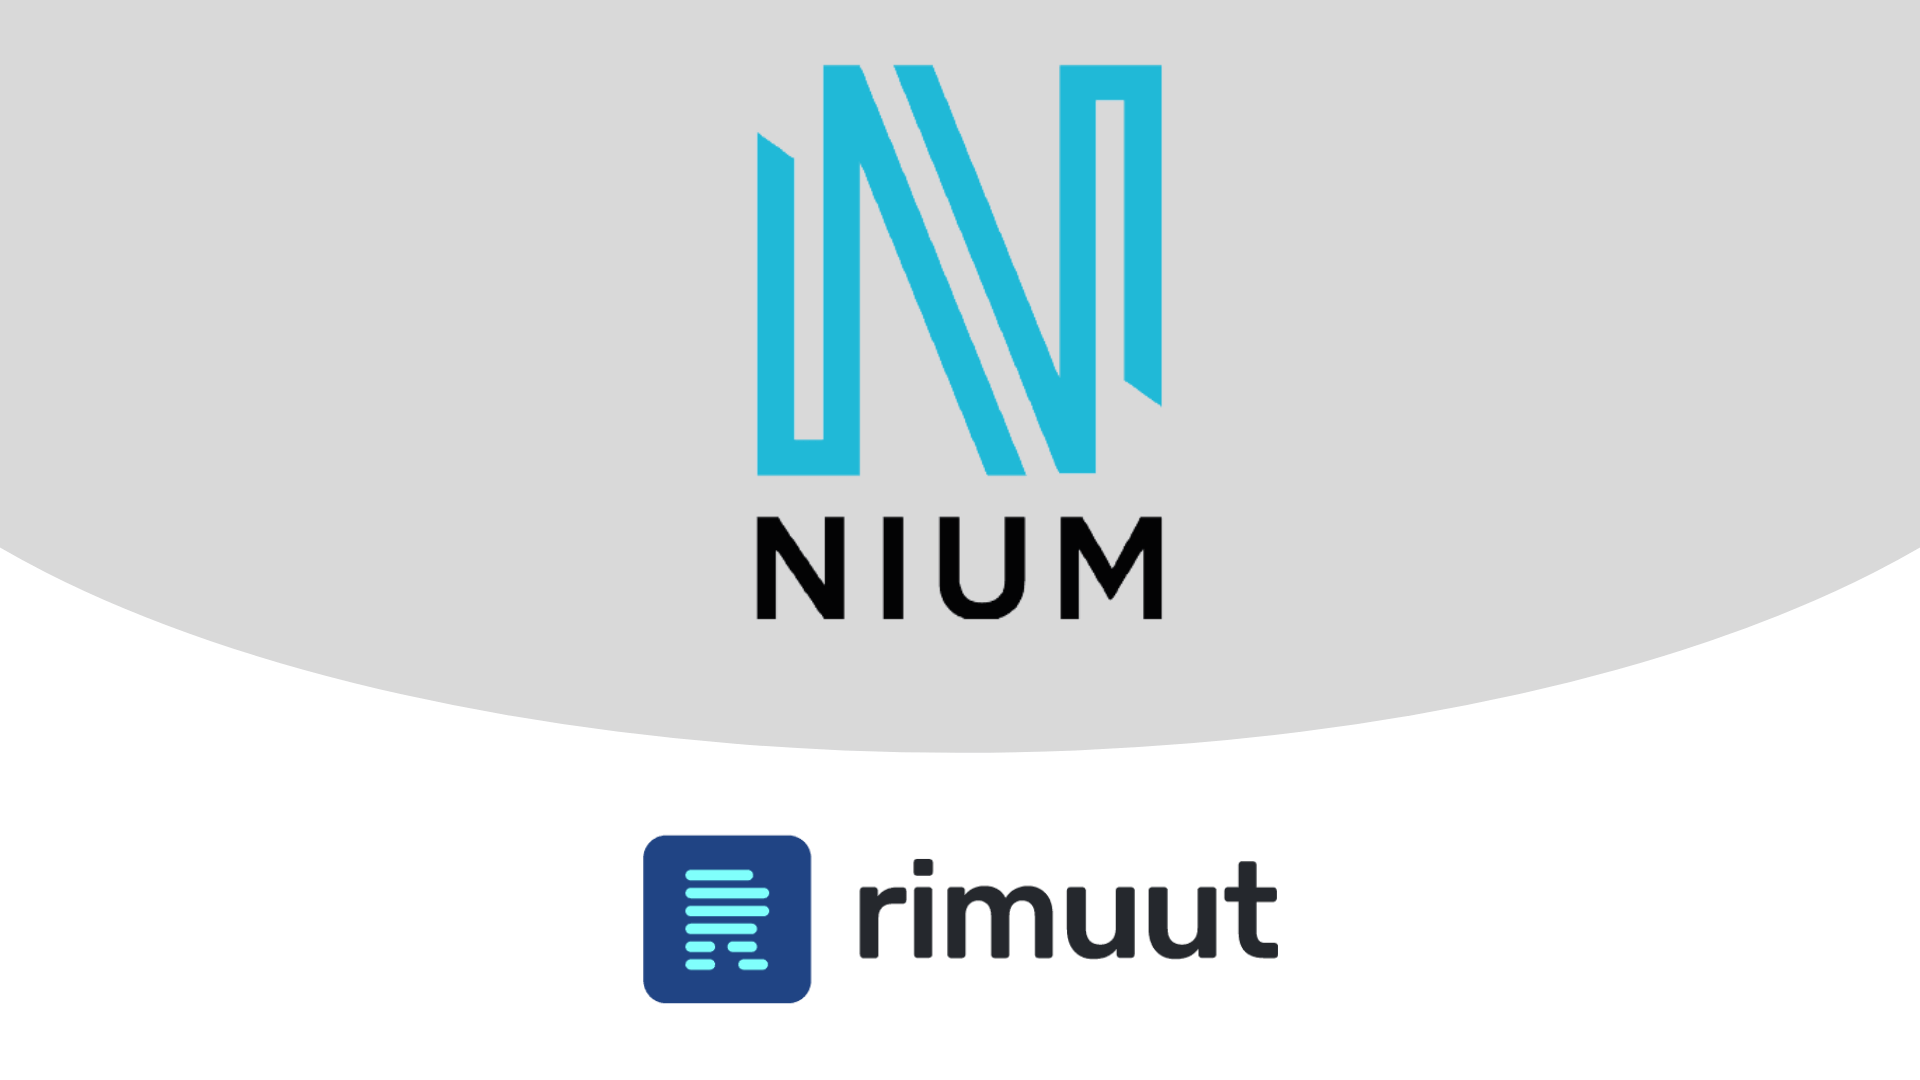 Rimuut partners with Nium to enable seamless international payment services for businesses and freelancers